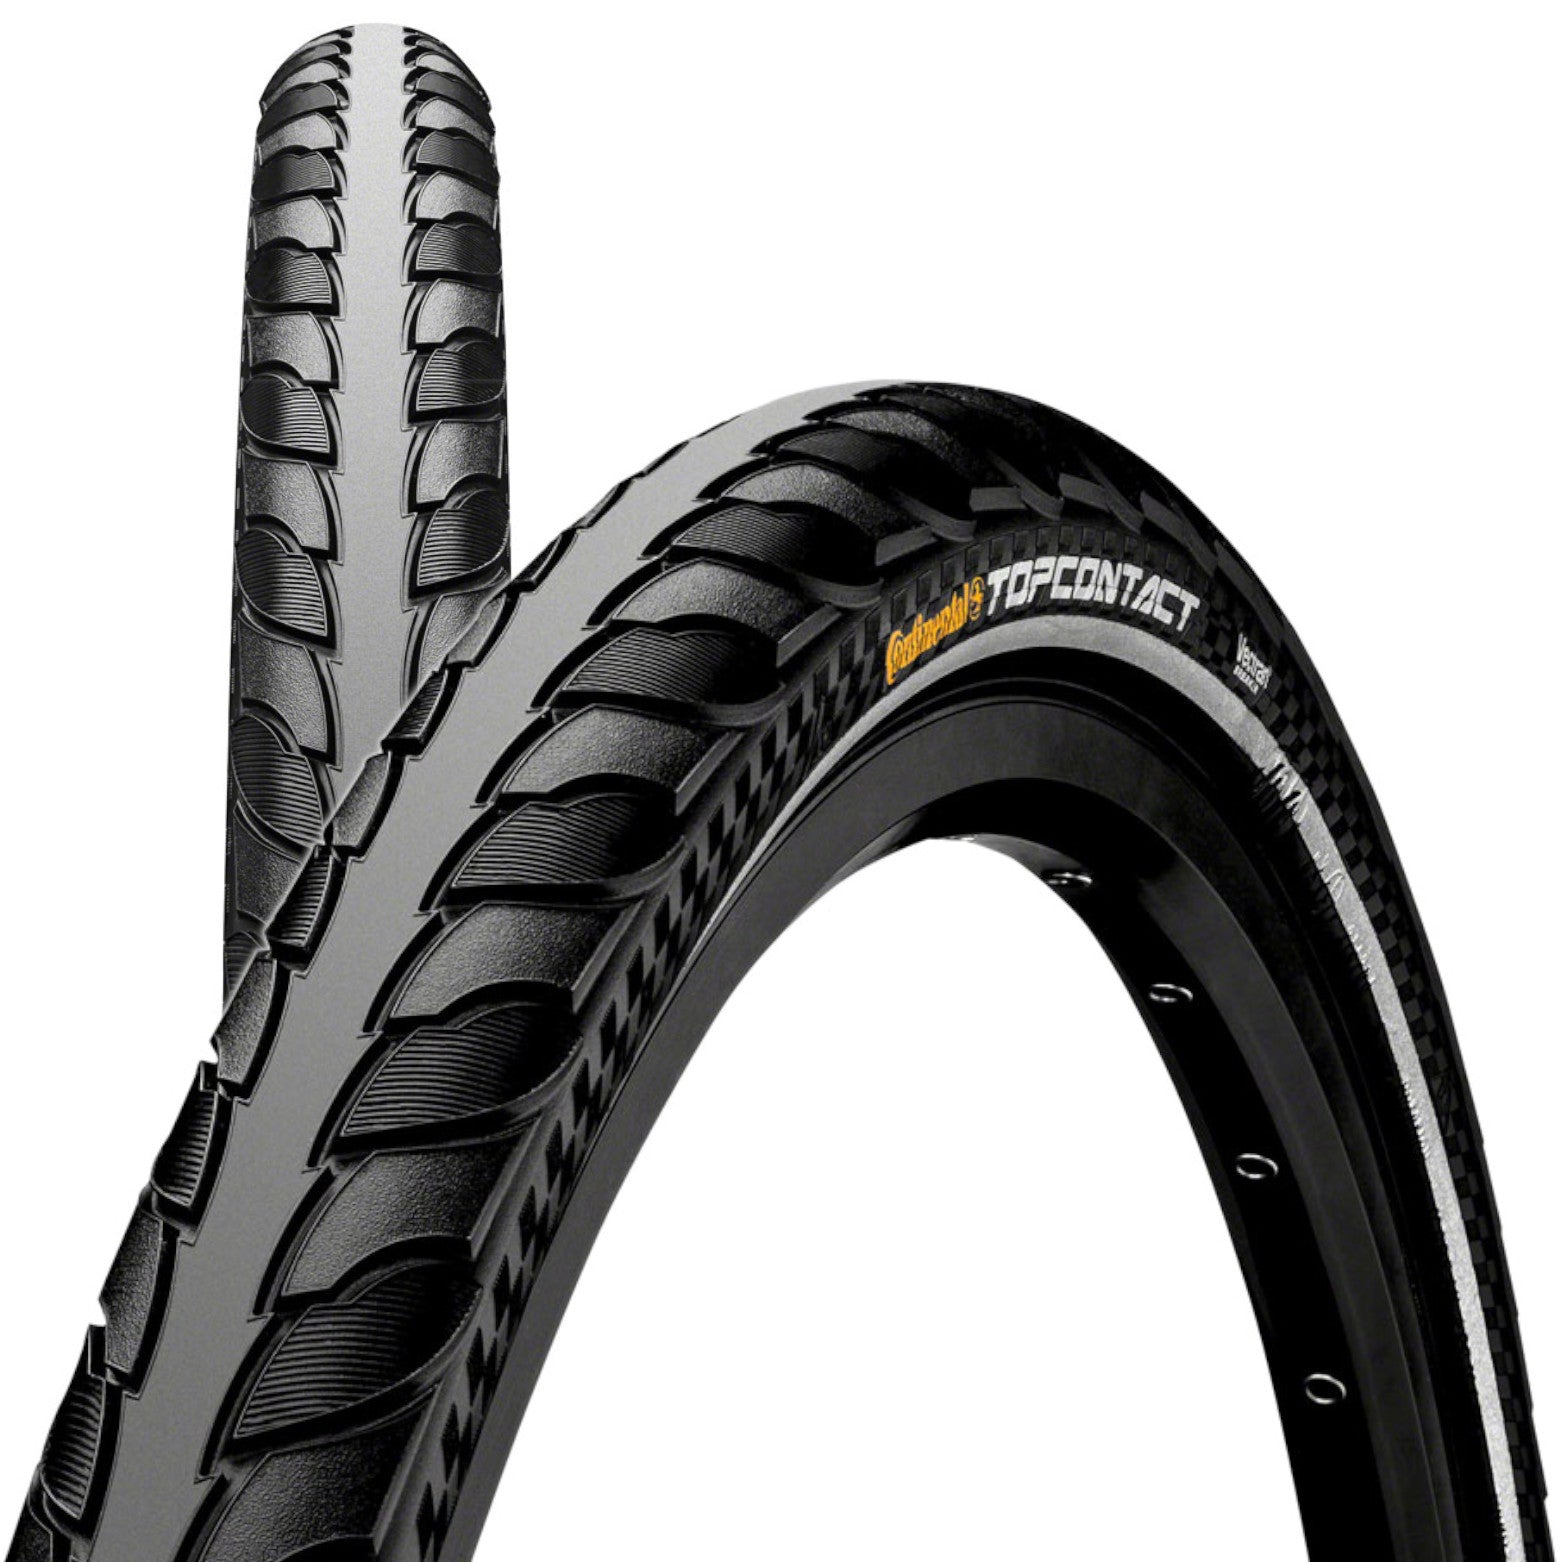 Continental Top Contact II 700C Folding Tire - The Bikesmiths